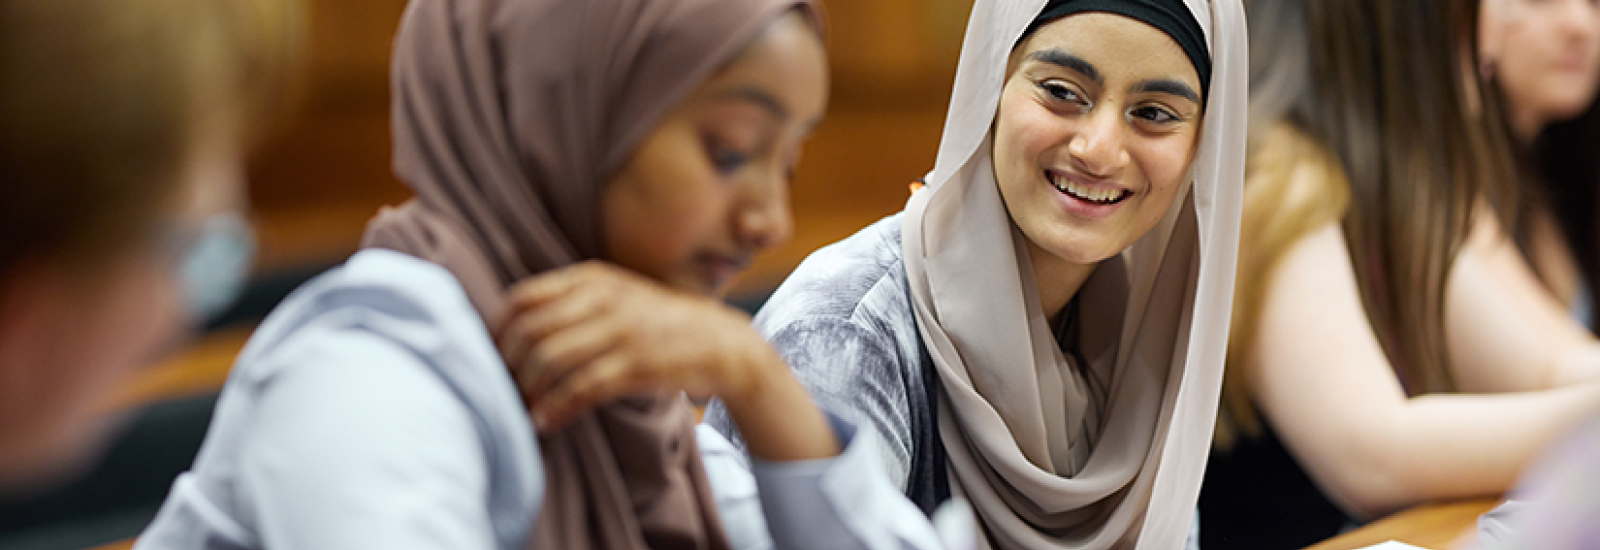 Two female students in an education setting, smiling together